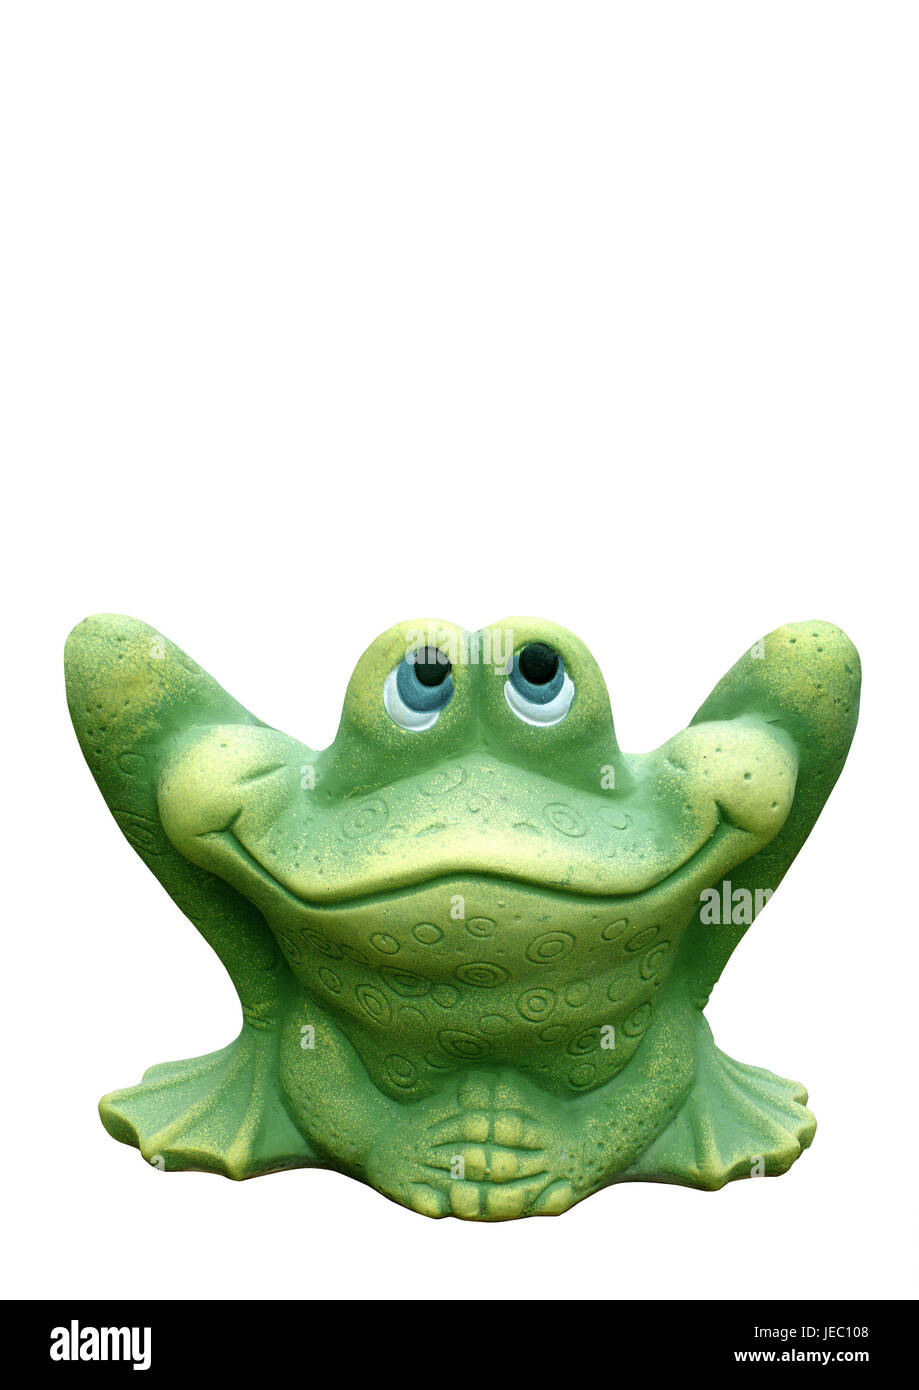 Stuffed frog toy Cut Out Stock Images & Pictures - Alamy